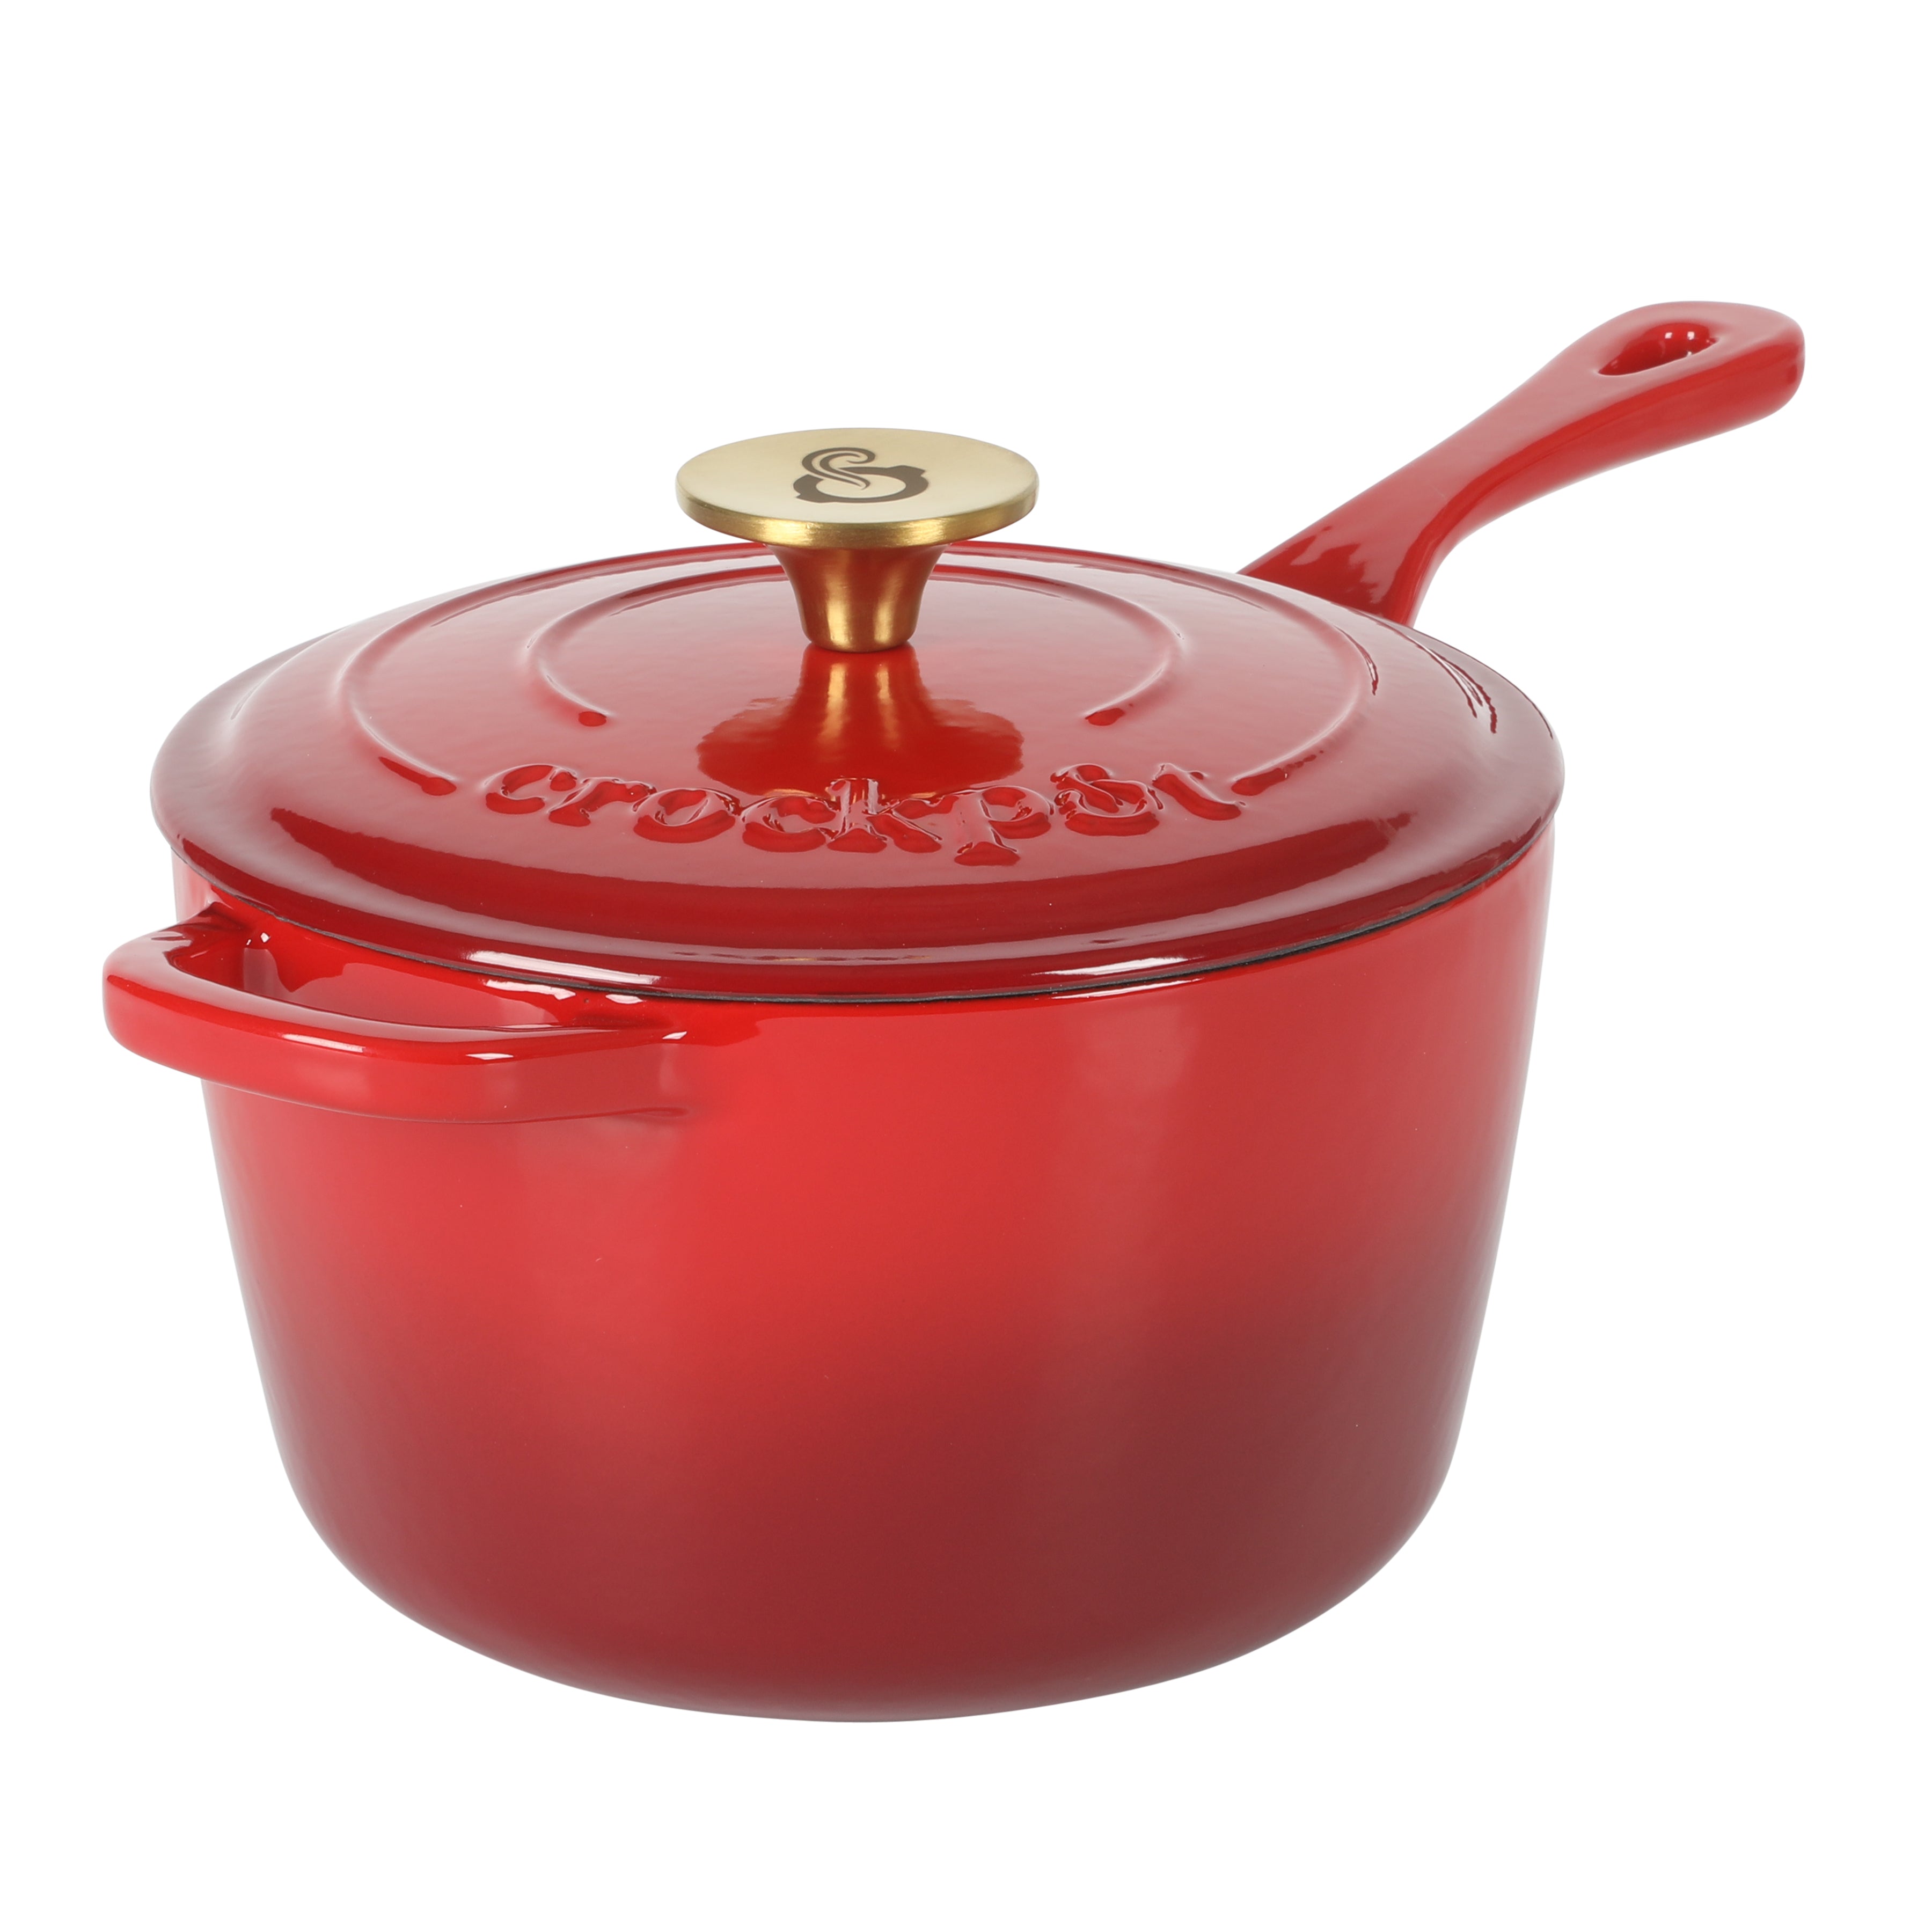 Cast Iron Dutch Oven with Lid-3 Quart Enamel Coated Pot for Oven